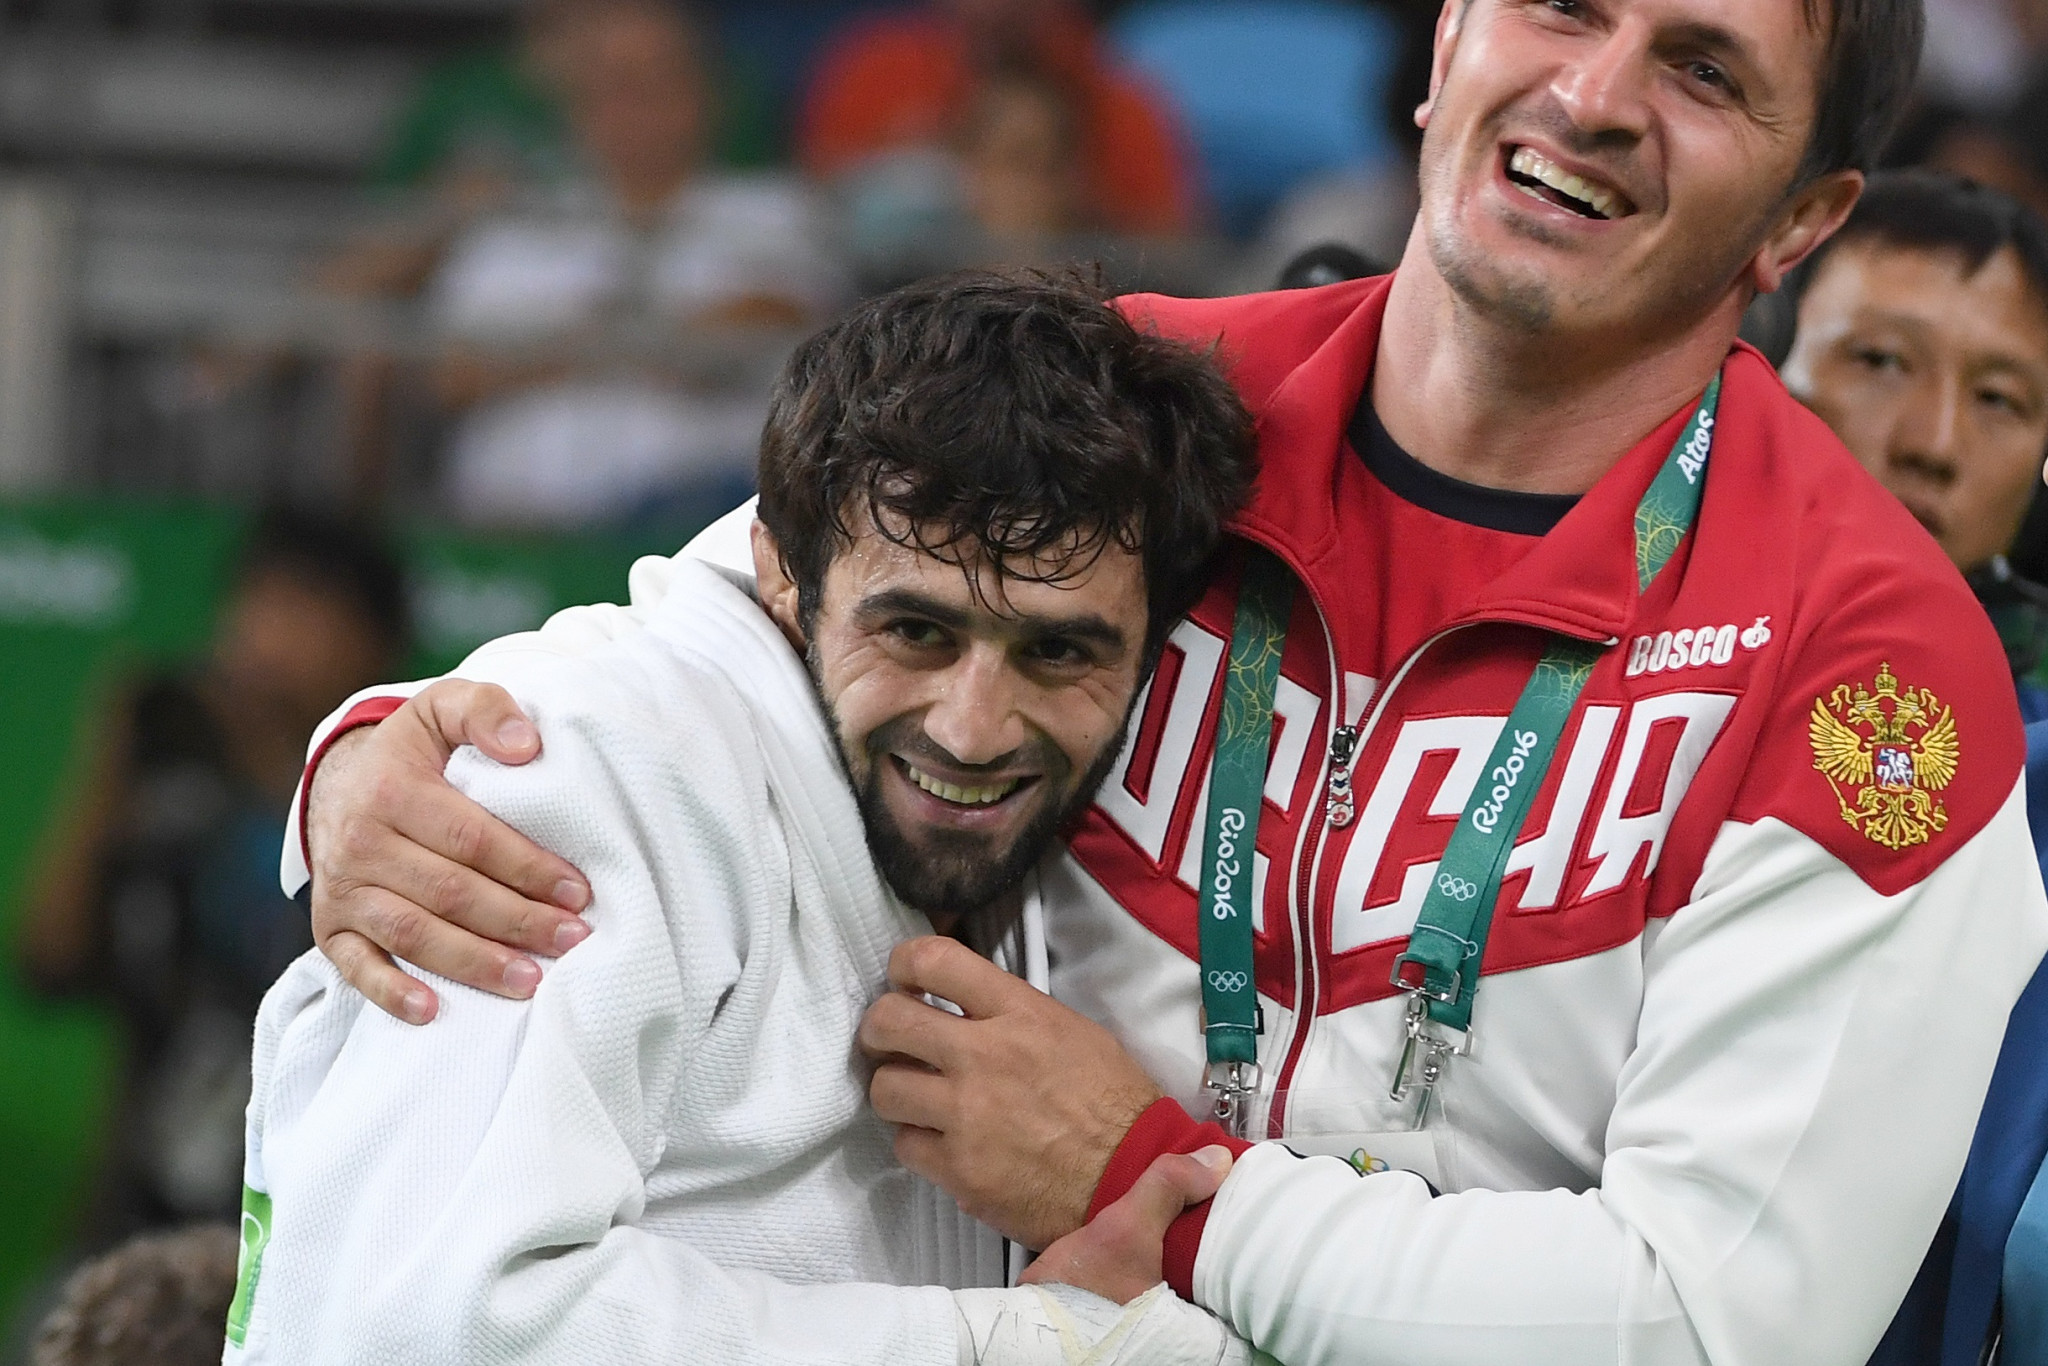 Russia's Rio 2016 gold medallist Beslan Mudranov, left, believes the country's judoka are now 